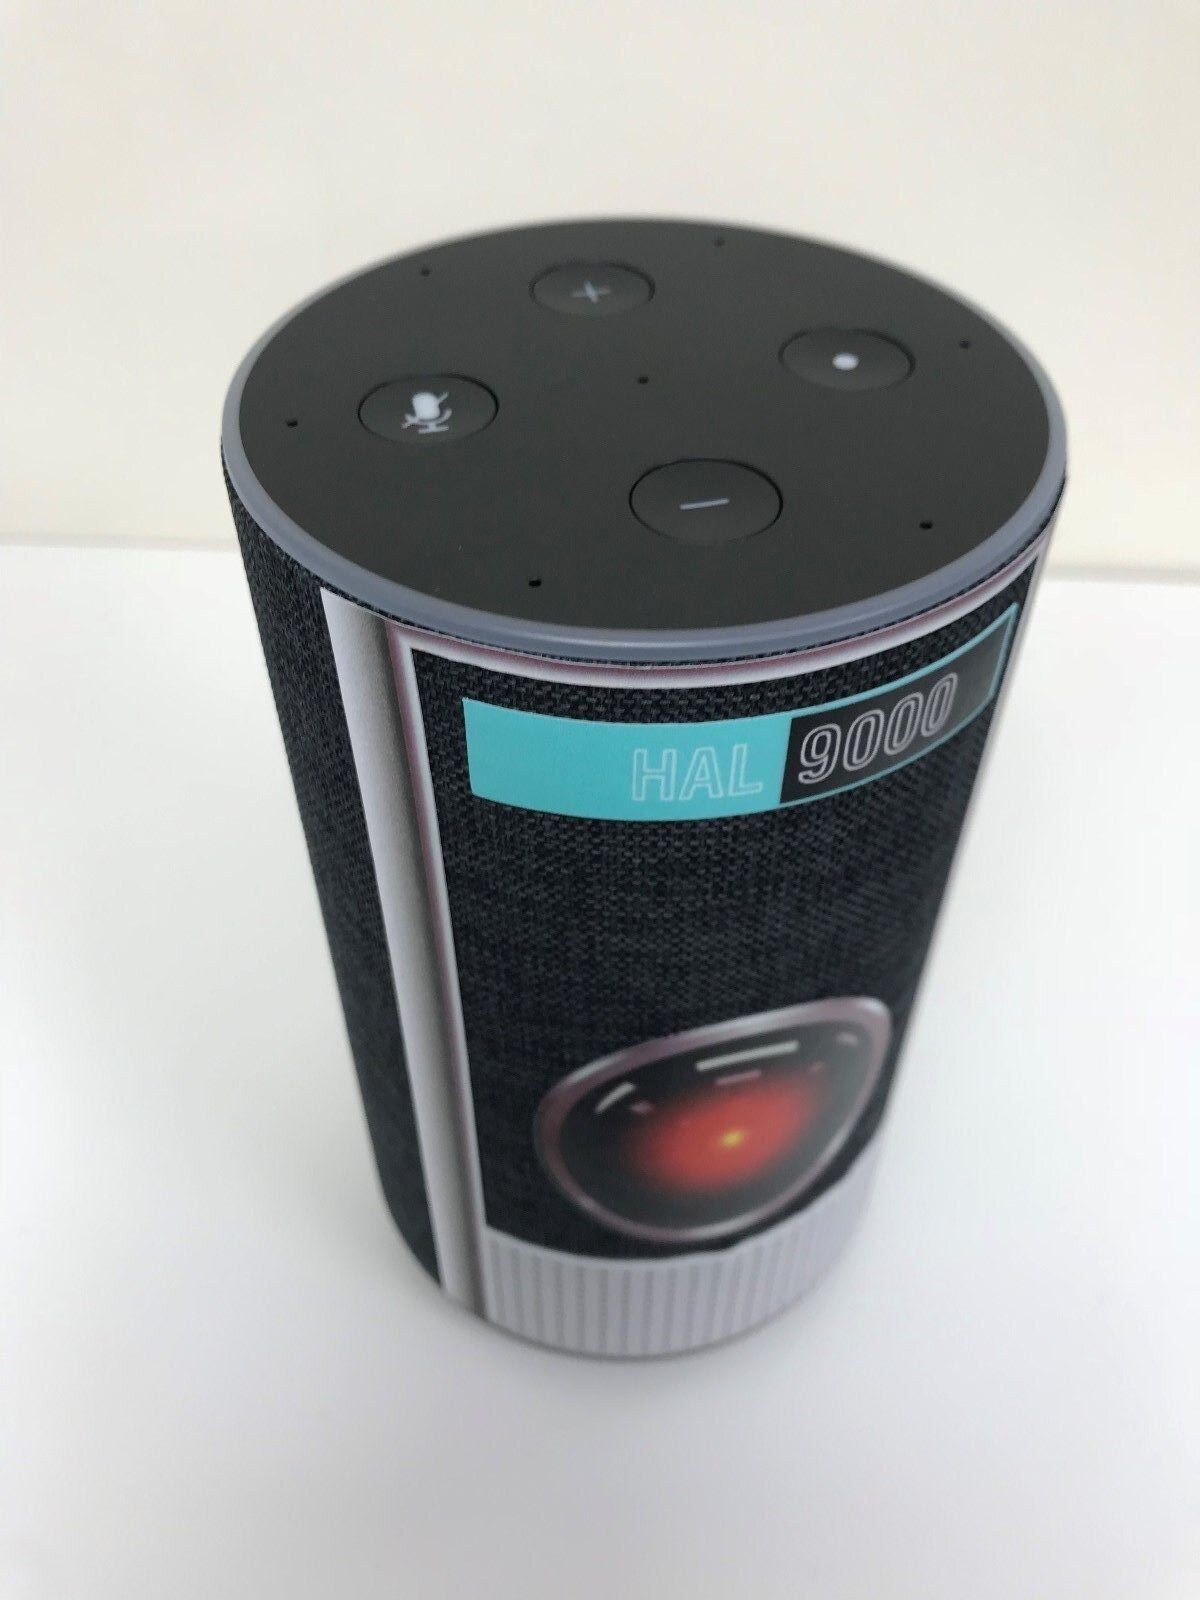 anden Analytisk Nathaniel Ward 2001 Space Odyssey Hal 9000 Amazon Echo Skin Decal 53 - Etsy